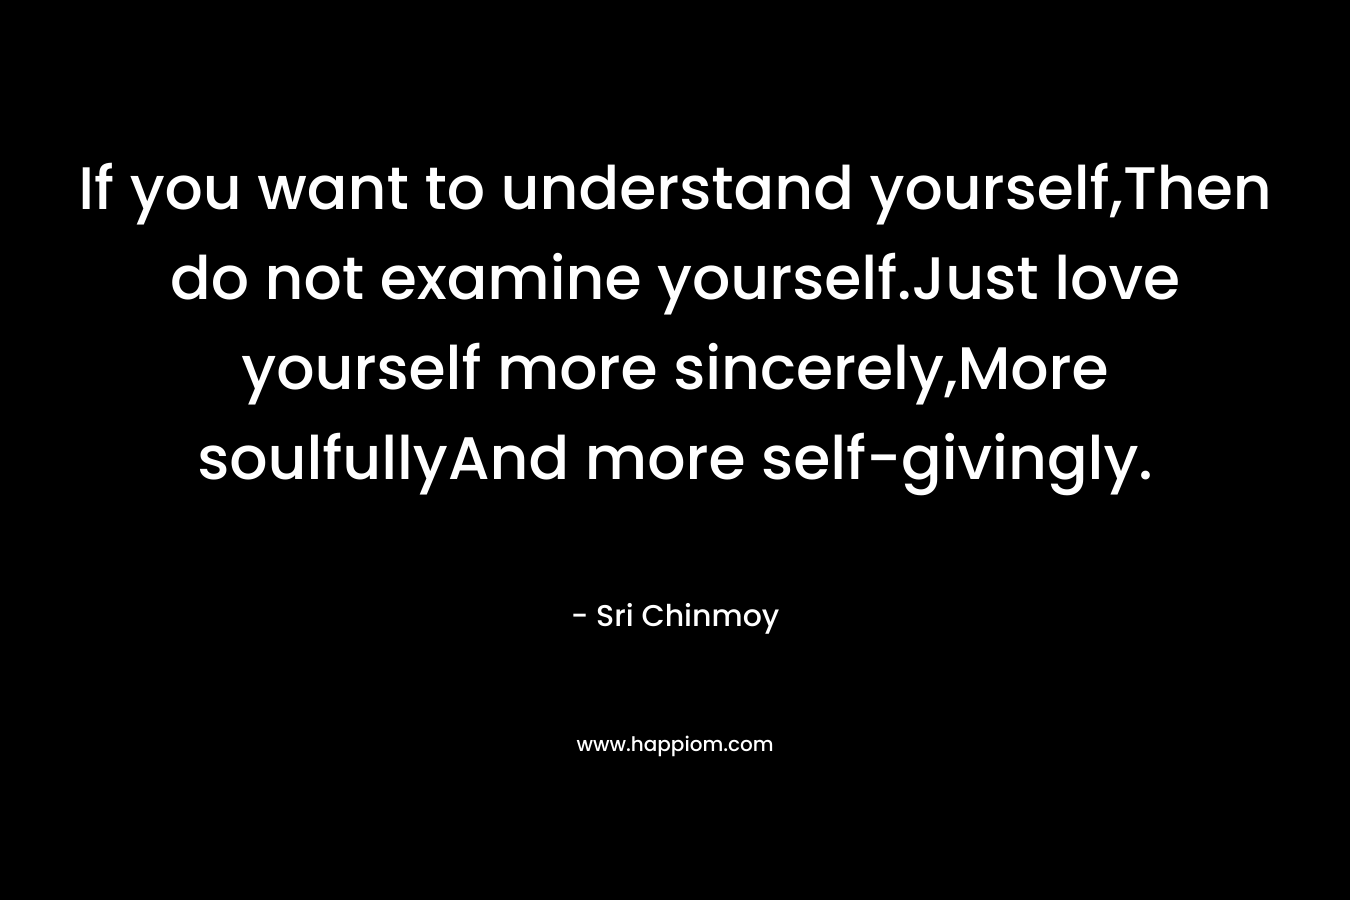 If you want to understand yourself,Then do not examine yourself.Just love yourself more sincerely,More soulfullyAnd more self-givingly. – Sri Chinmoy